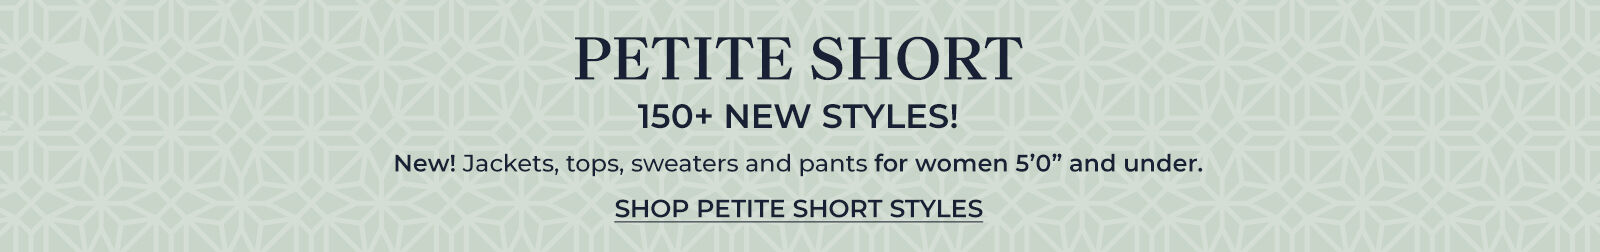 petite short 150+ new styles! new! jackets, tops, sweaters and pants for women 5'0" and under shop petite short styles